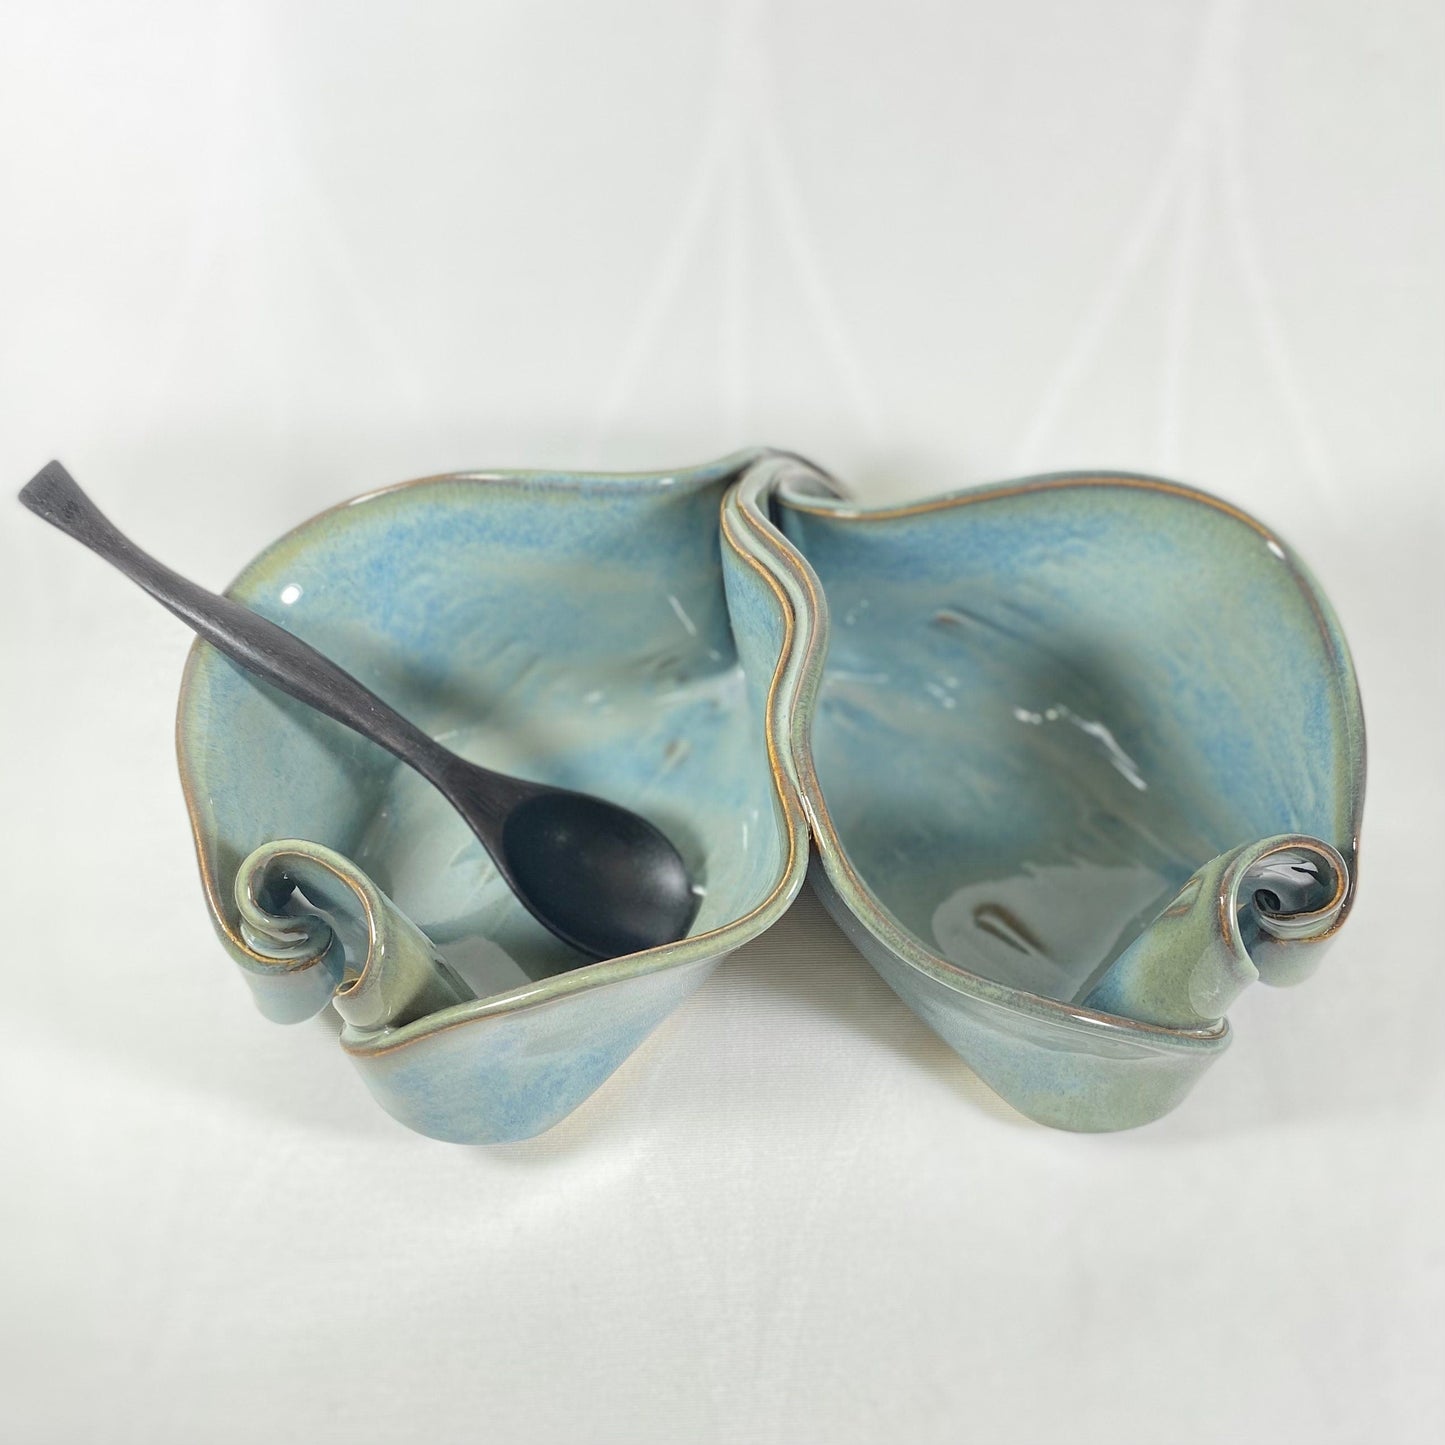 Handmade Light Blue Double Sided Bowl with Serving Spoon, Functional and Decorative Pottery